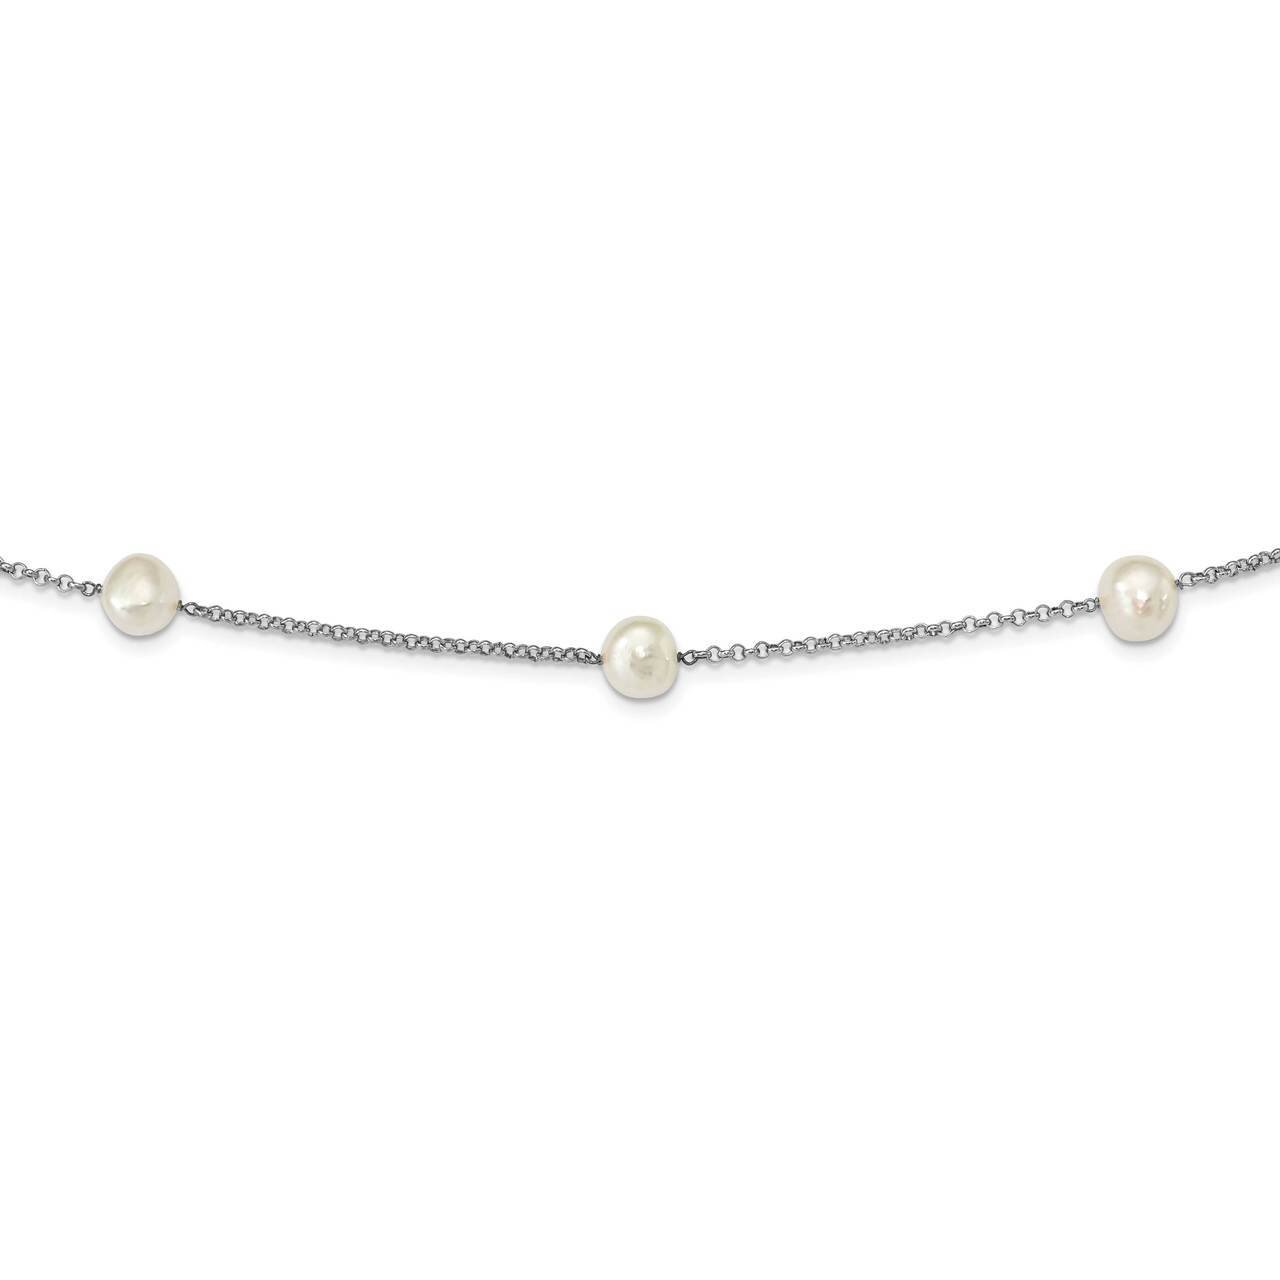 9-10mm White Baroq Freshwater Cultured Pearl 7-stat Necklace Sterling Silver Rhodium Plated QH5555-20